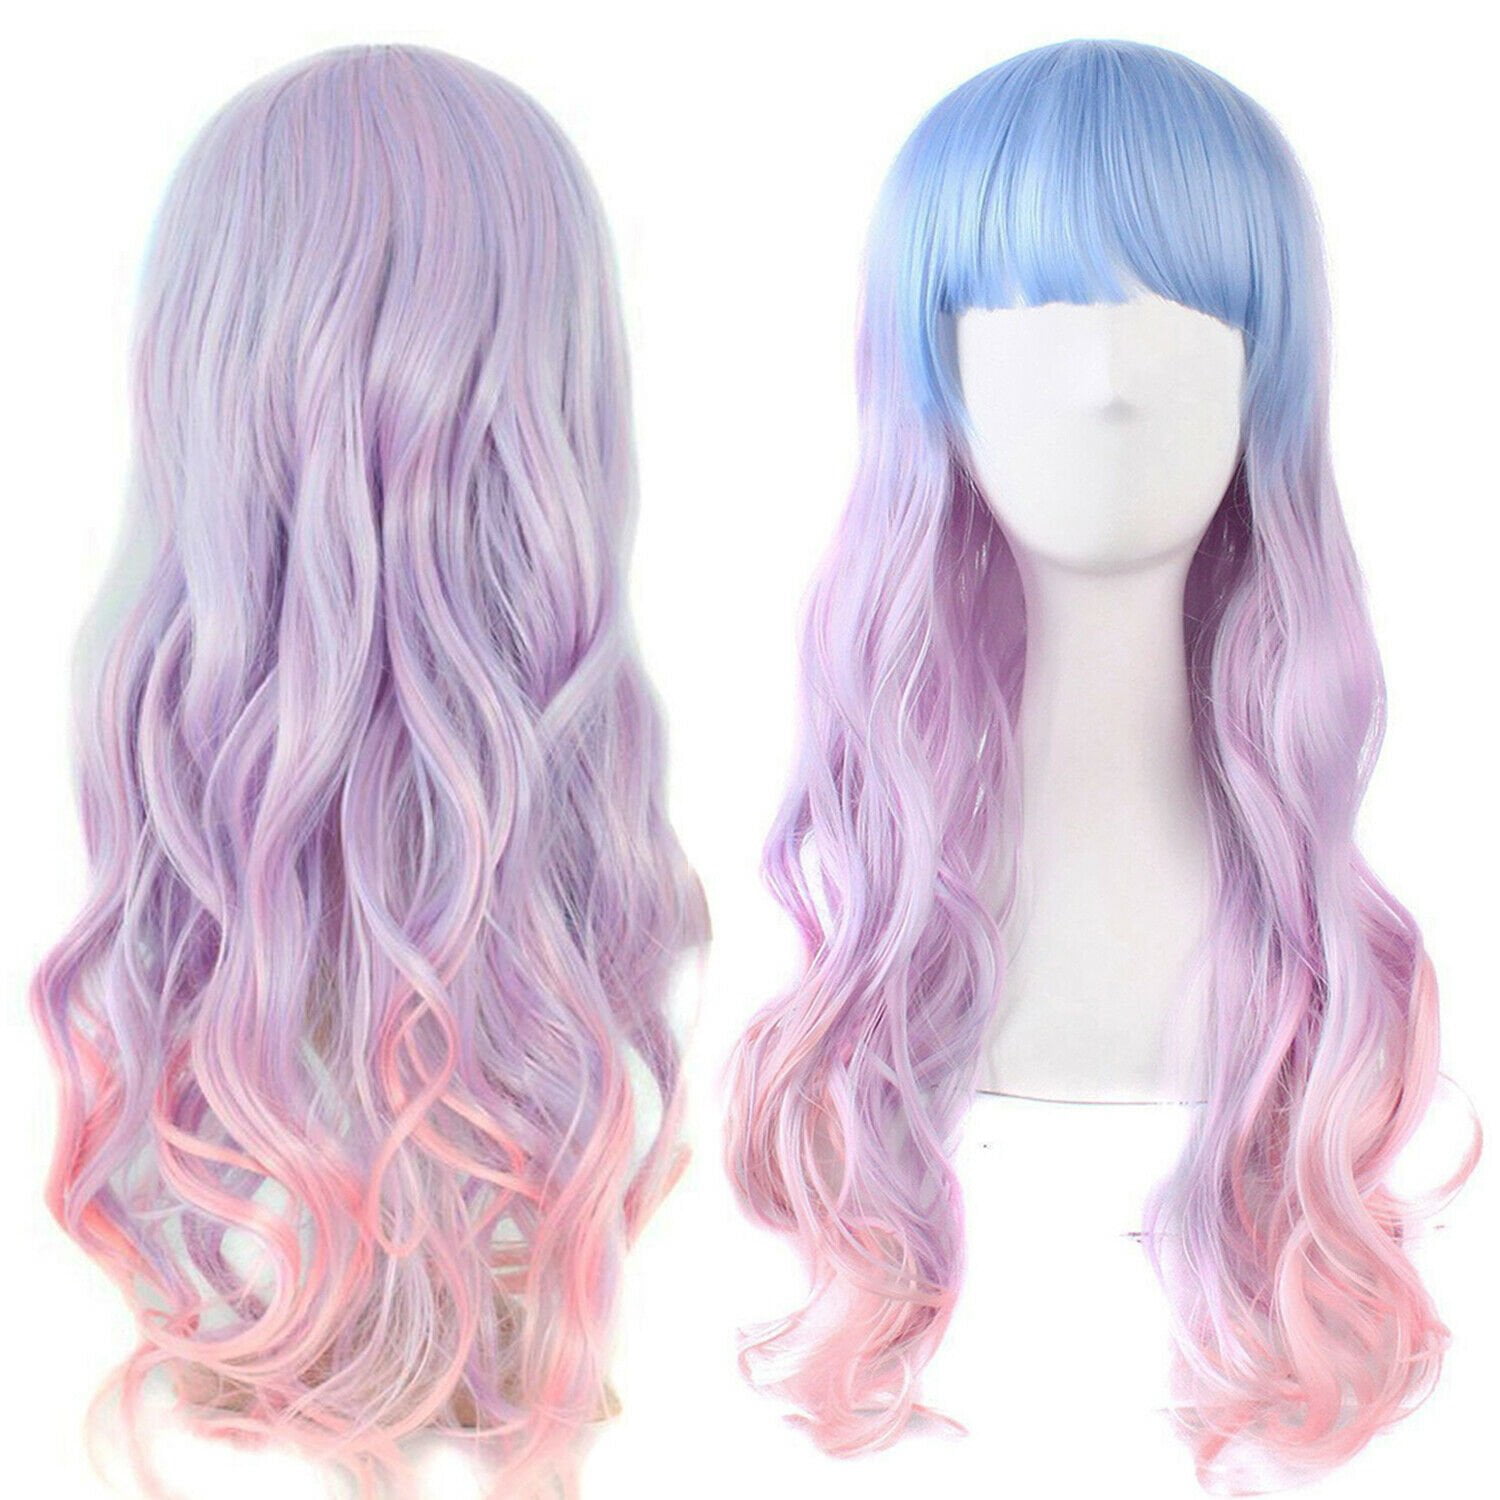 Blue Banana Bright Coloured Baby Pink Wavy Long Wig/Synthetic Hair With Fringe 